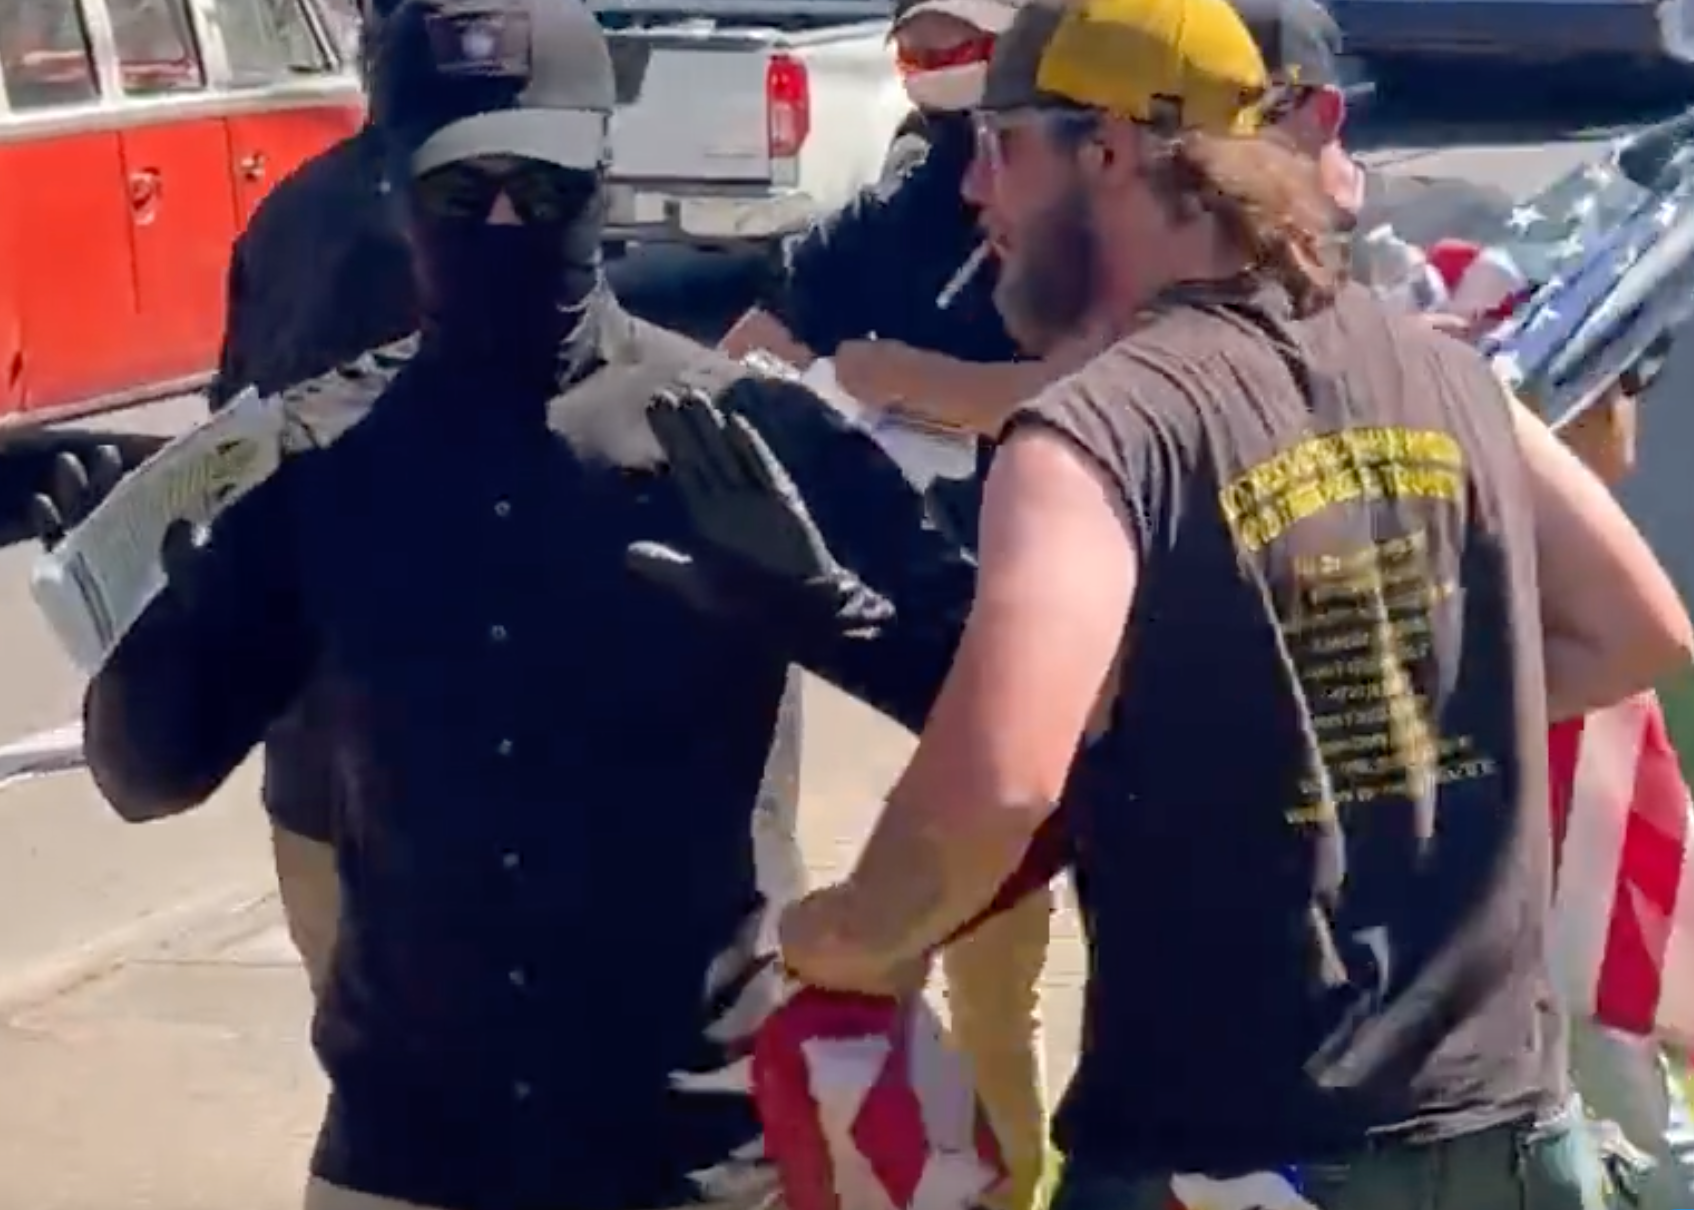 Proud Boys try to &#8220;unmask&#8221; neo-Nazis as white supremacists clash at Pride